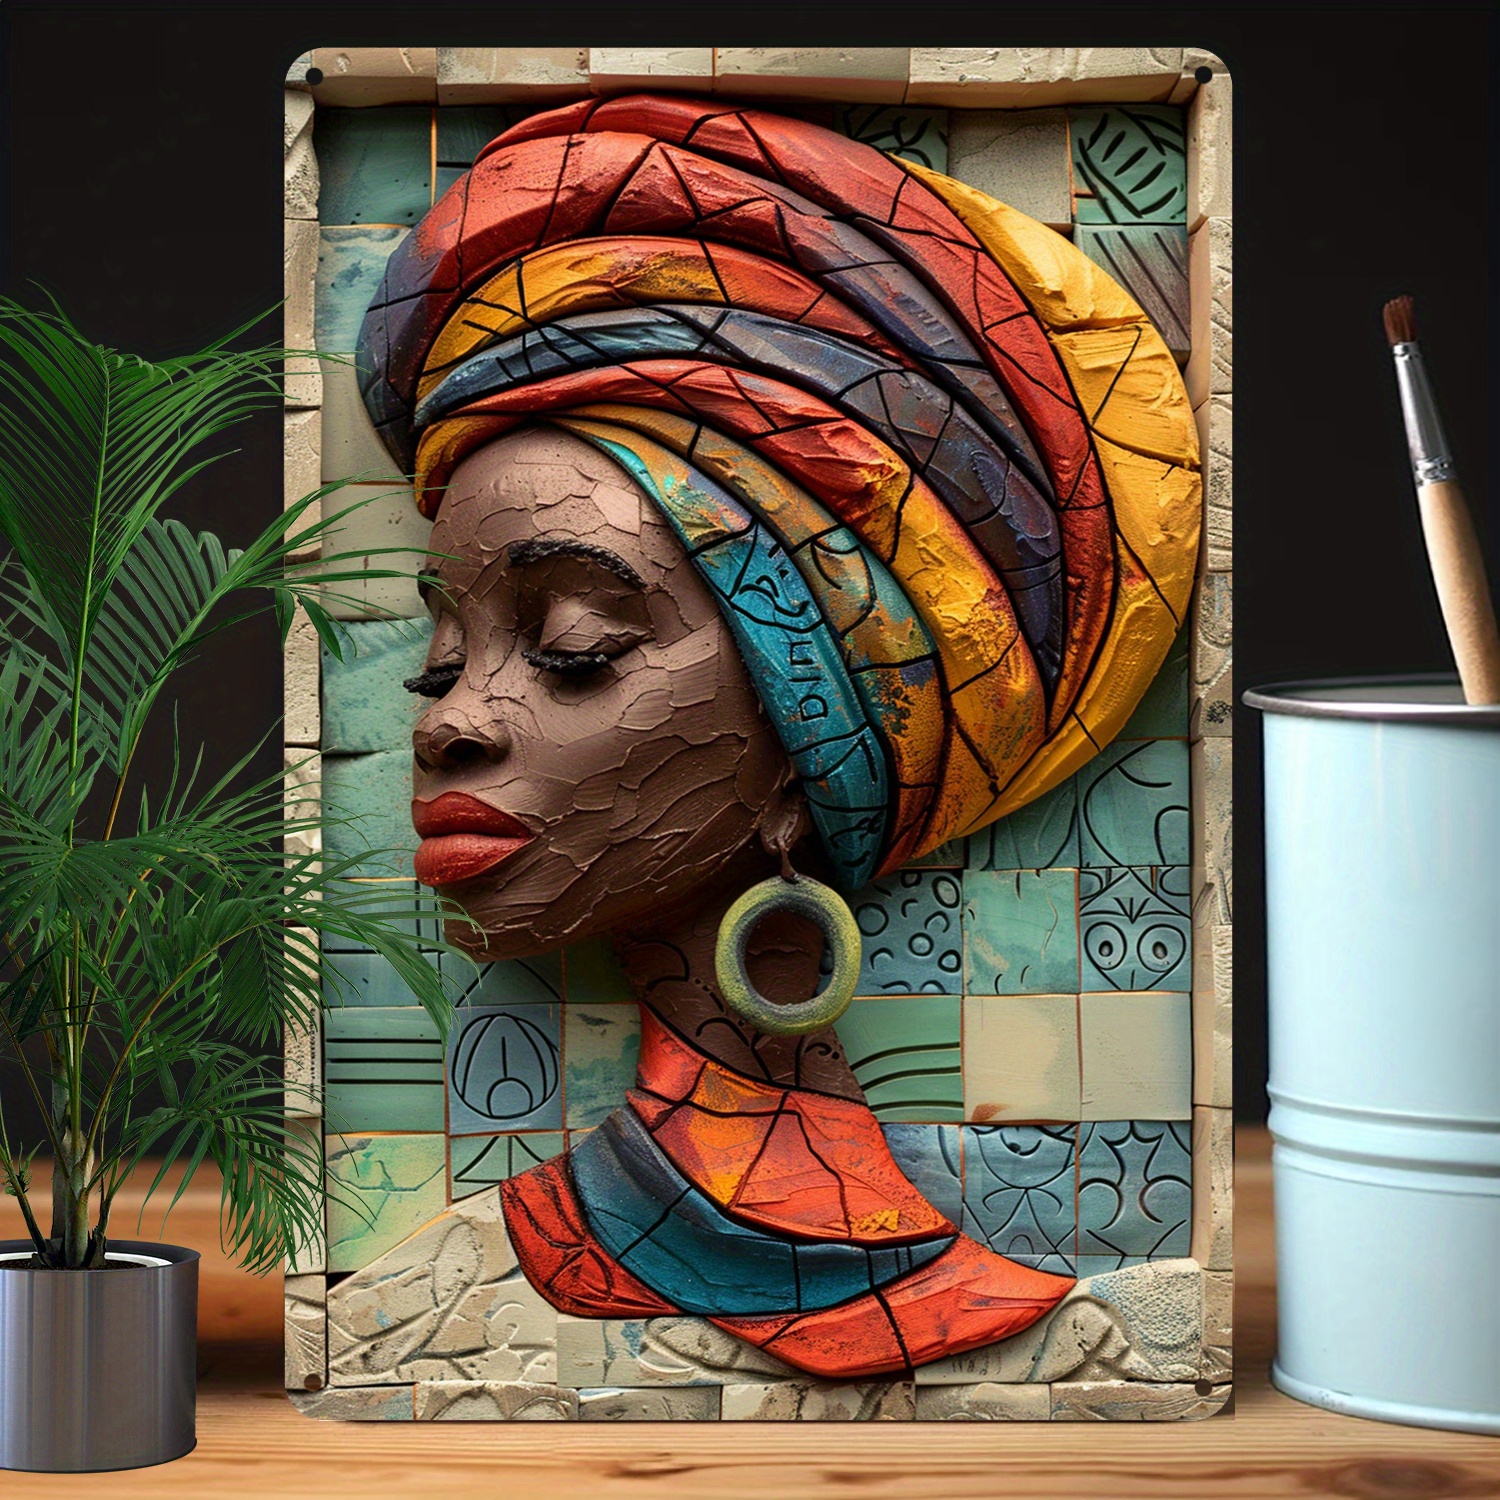 

1pc African Culture Themed 2d Aluminum Tin Sign, Moisture Resistant & High Bending Resistance, Vintage-inspired Wall Art For Home, Gym, Bathroom, Garden - 8x12 Inch Decorative Metal Plaque A1508